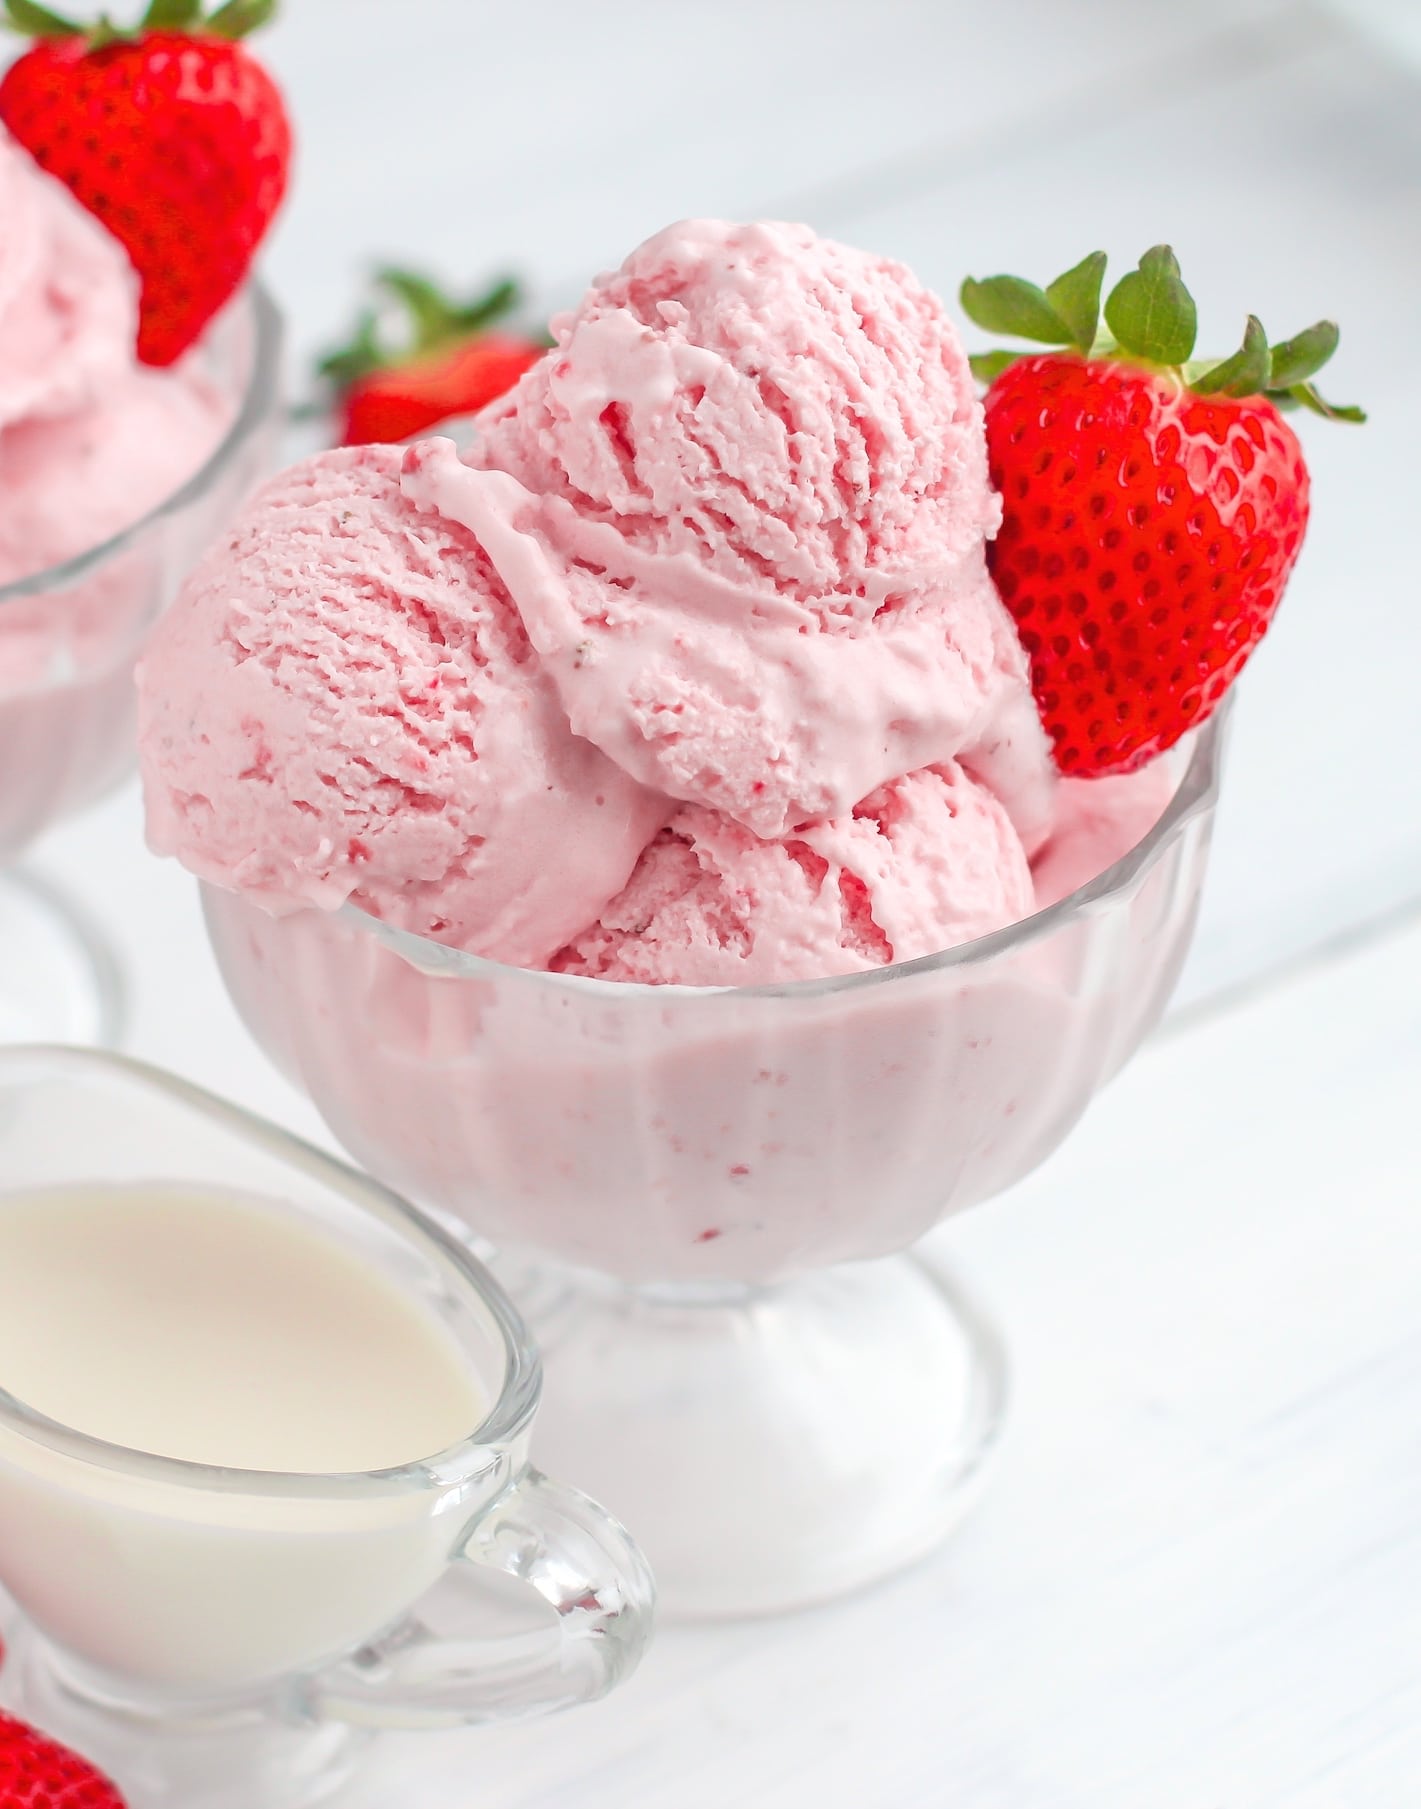 Healthy Strawberries 'n' Cream Ice Cream (no sugar added, high protein) from the Naughty or Nice Cookbook: The ULTIMATE Healthy Dessert Cookbook – Jessica Stier of Desserts with Benefits